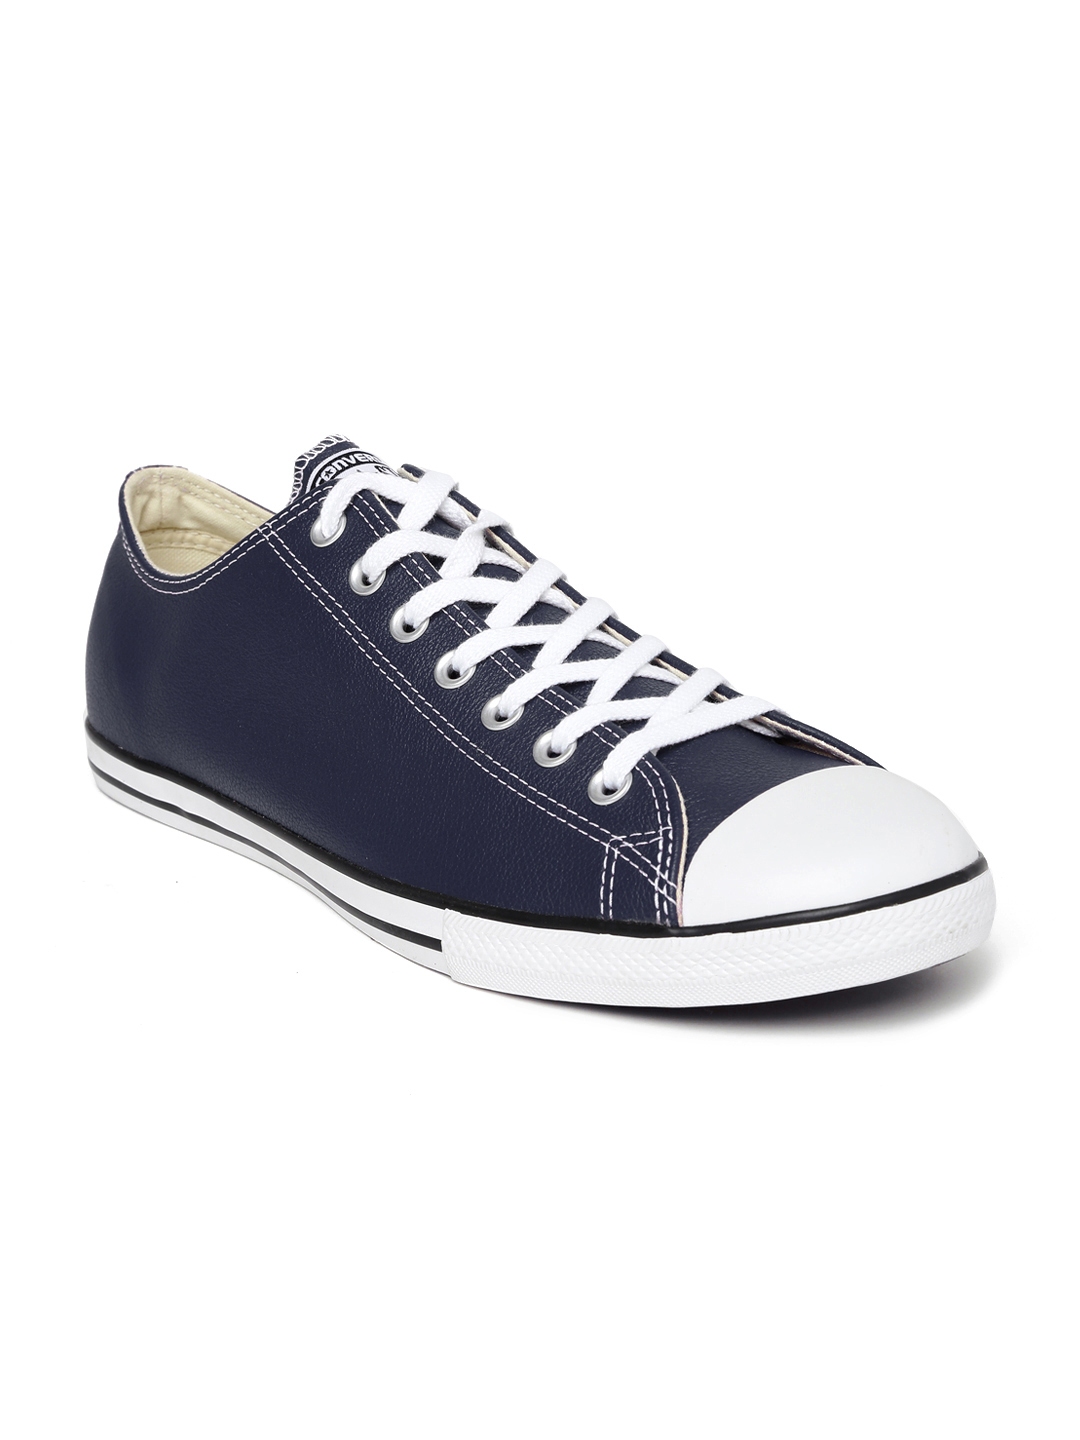 Buy Converse Unisex Navy Leather Sneakers - Casual Shoes for Unisex ...